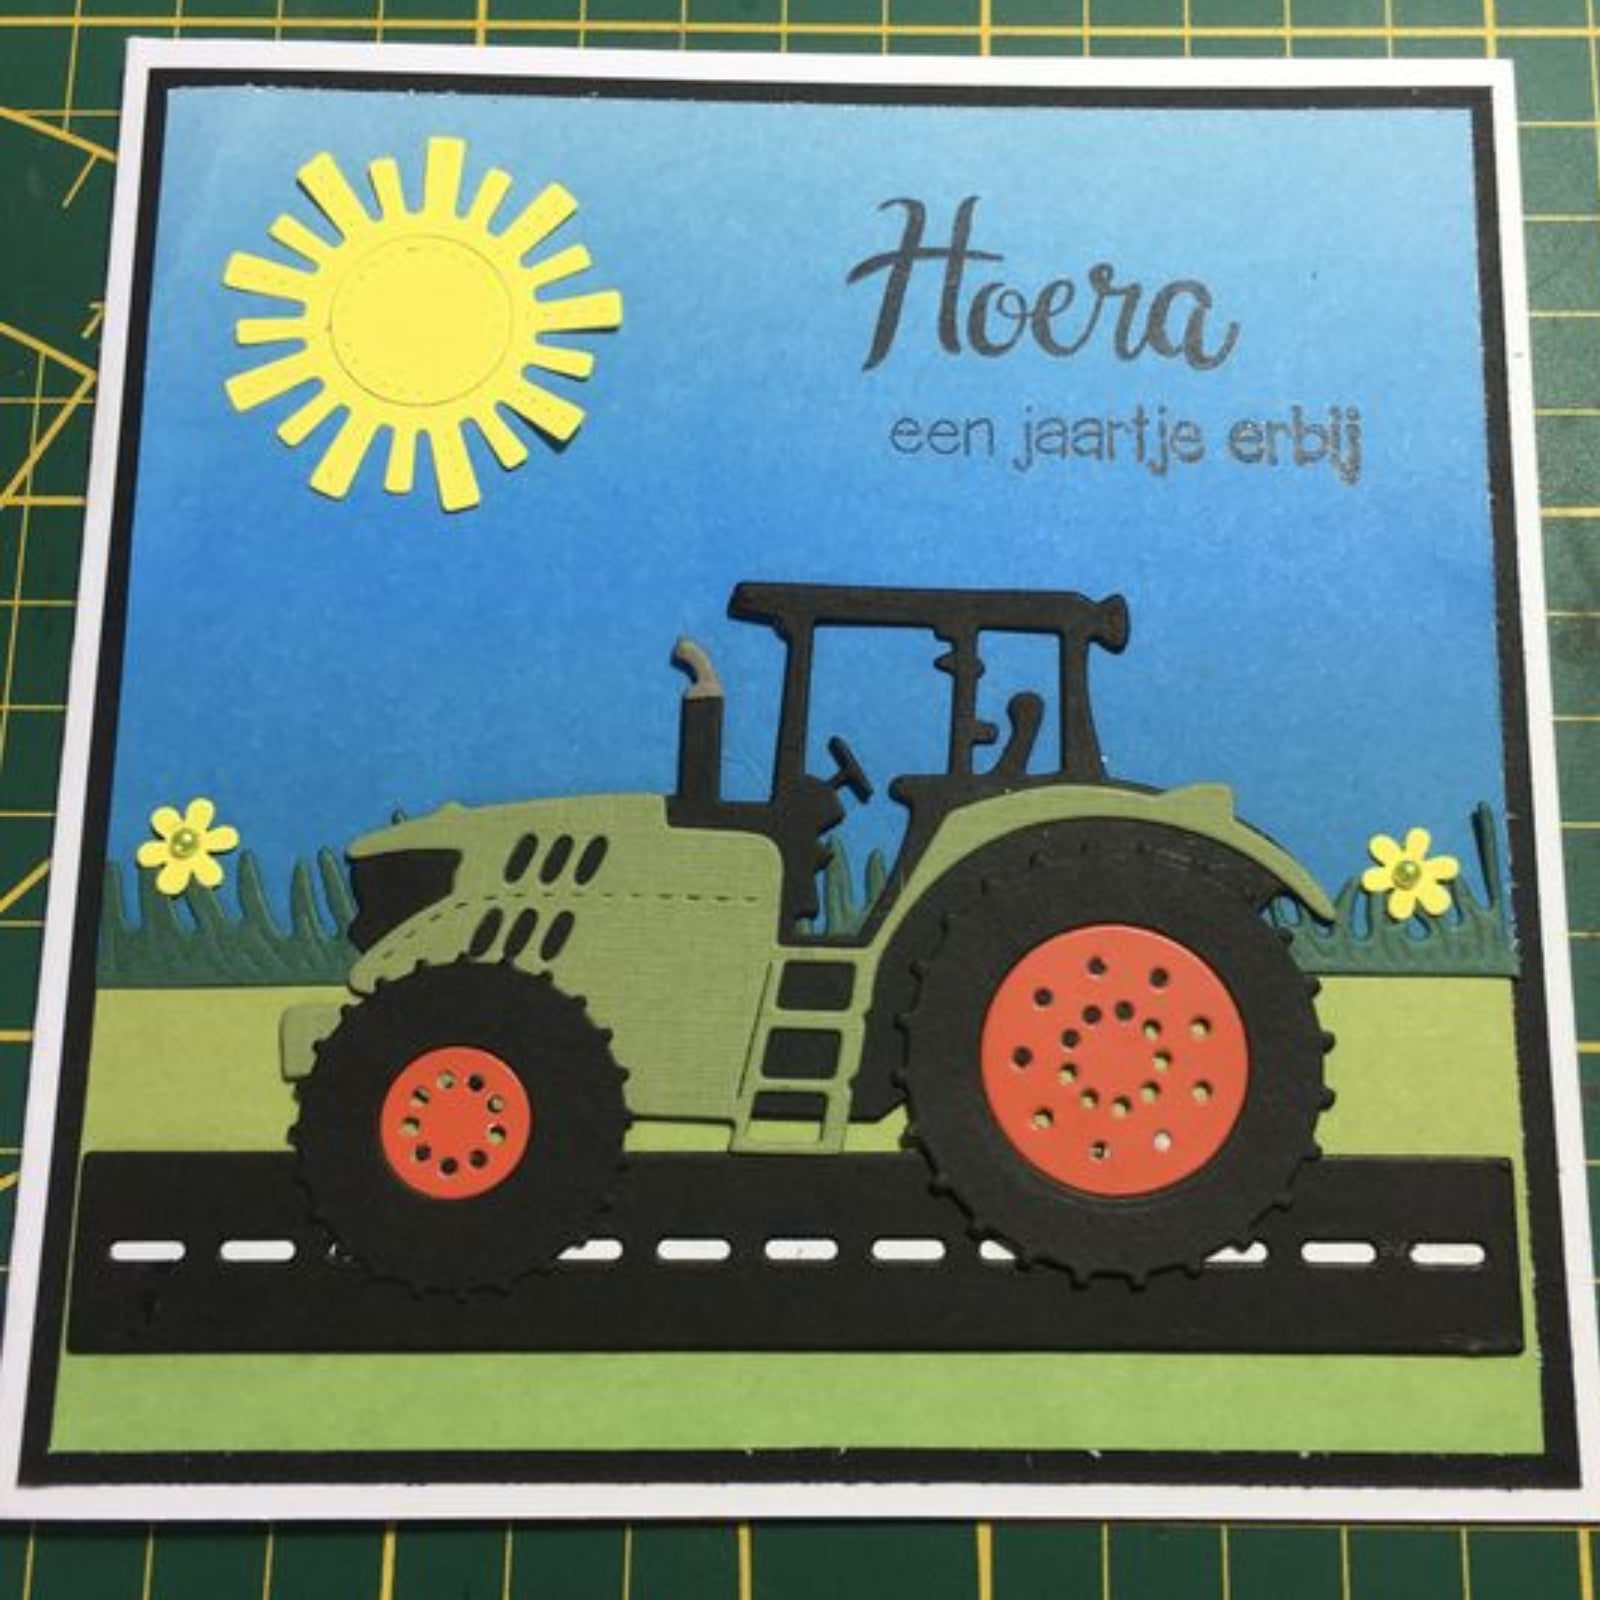 Build It Tractor Cutting & Embossing Dies